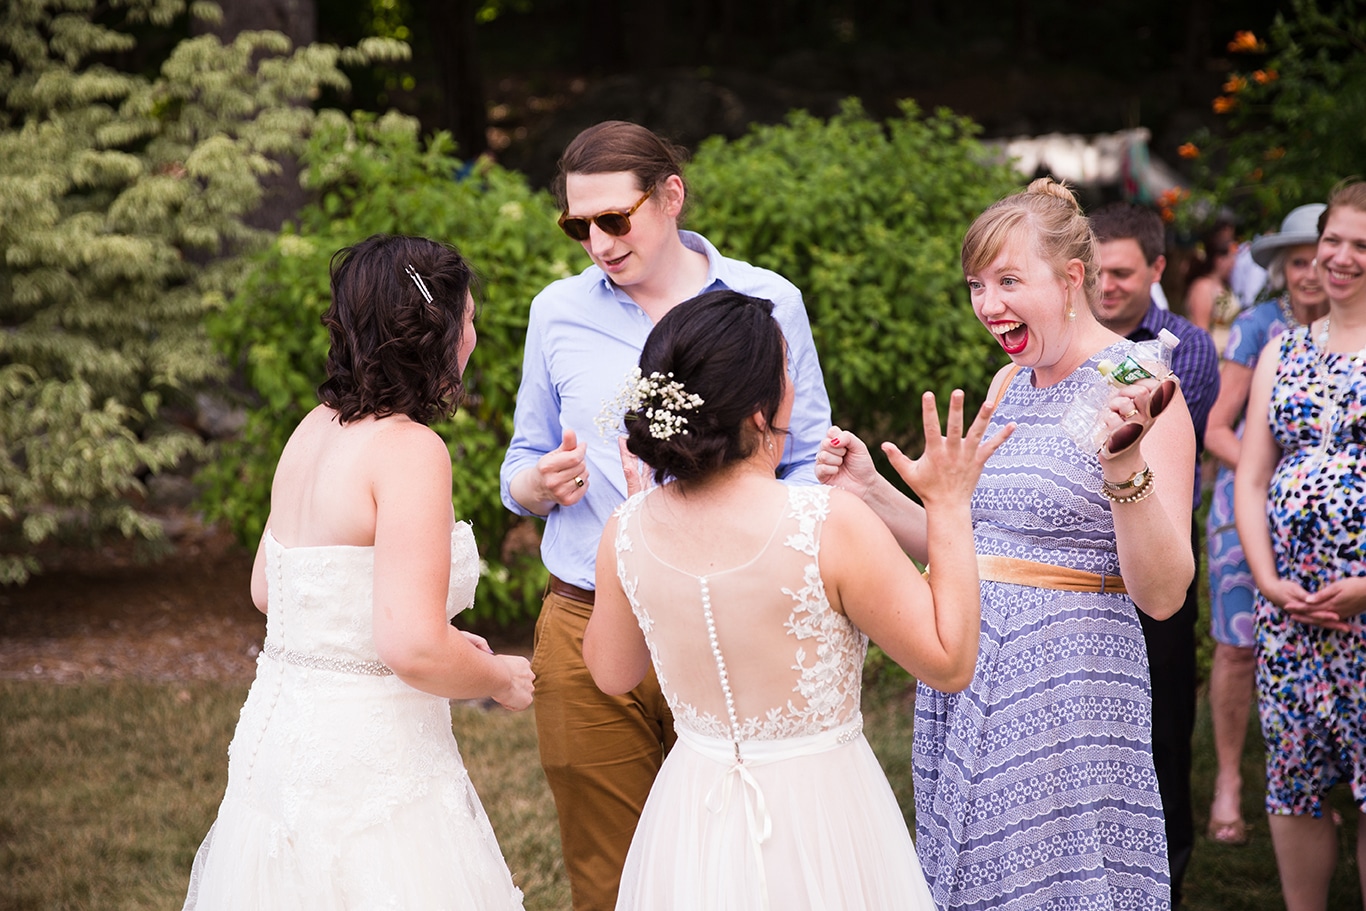 A documentary photograph of two brides celebrating with guests during their Friendly Crossways Wedding